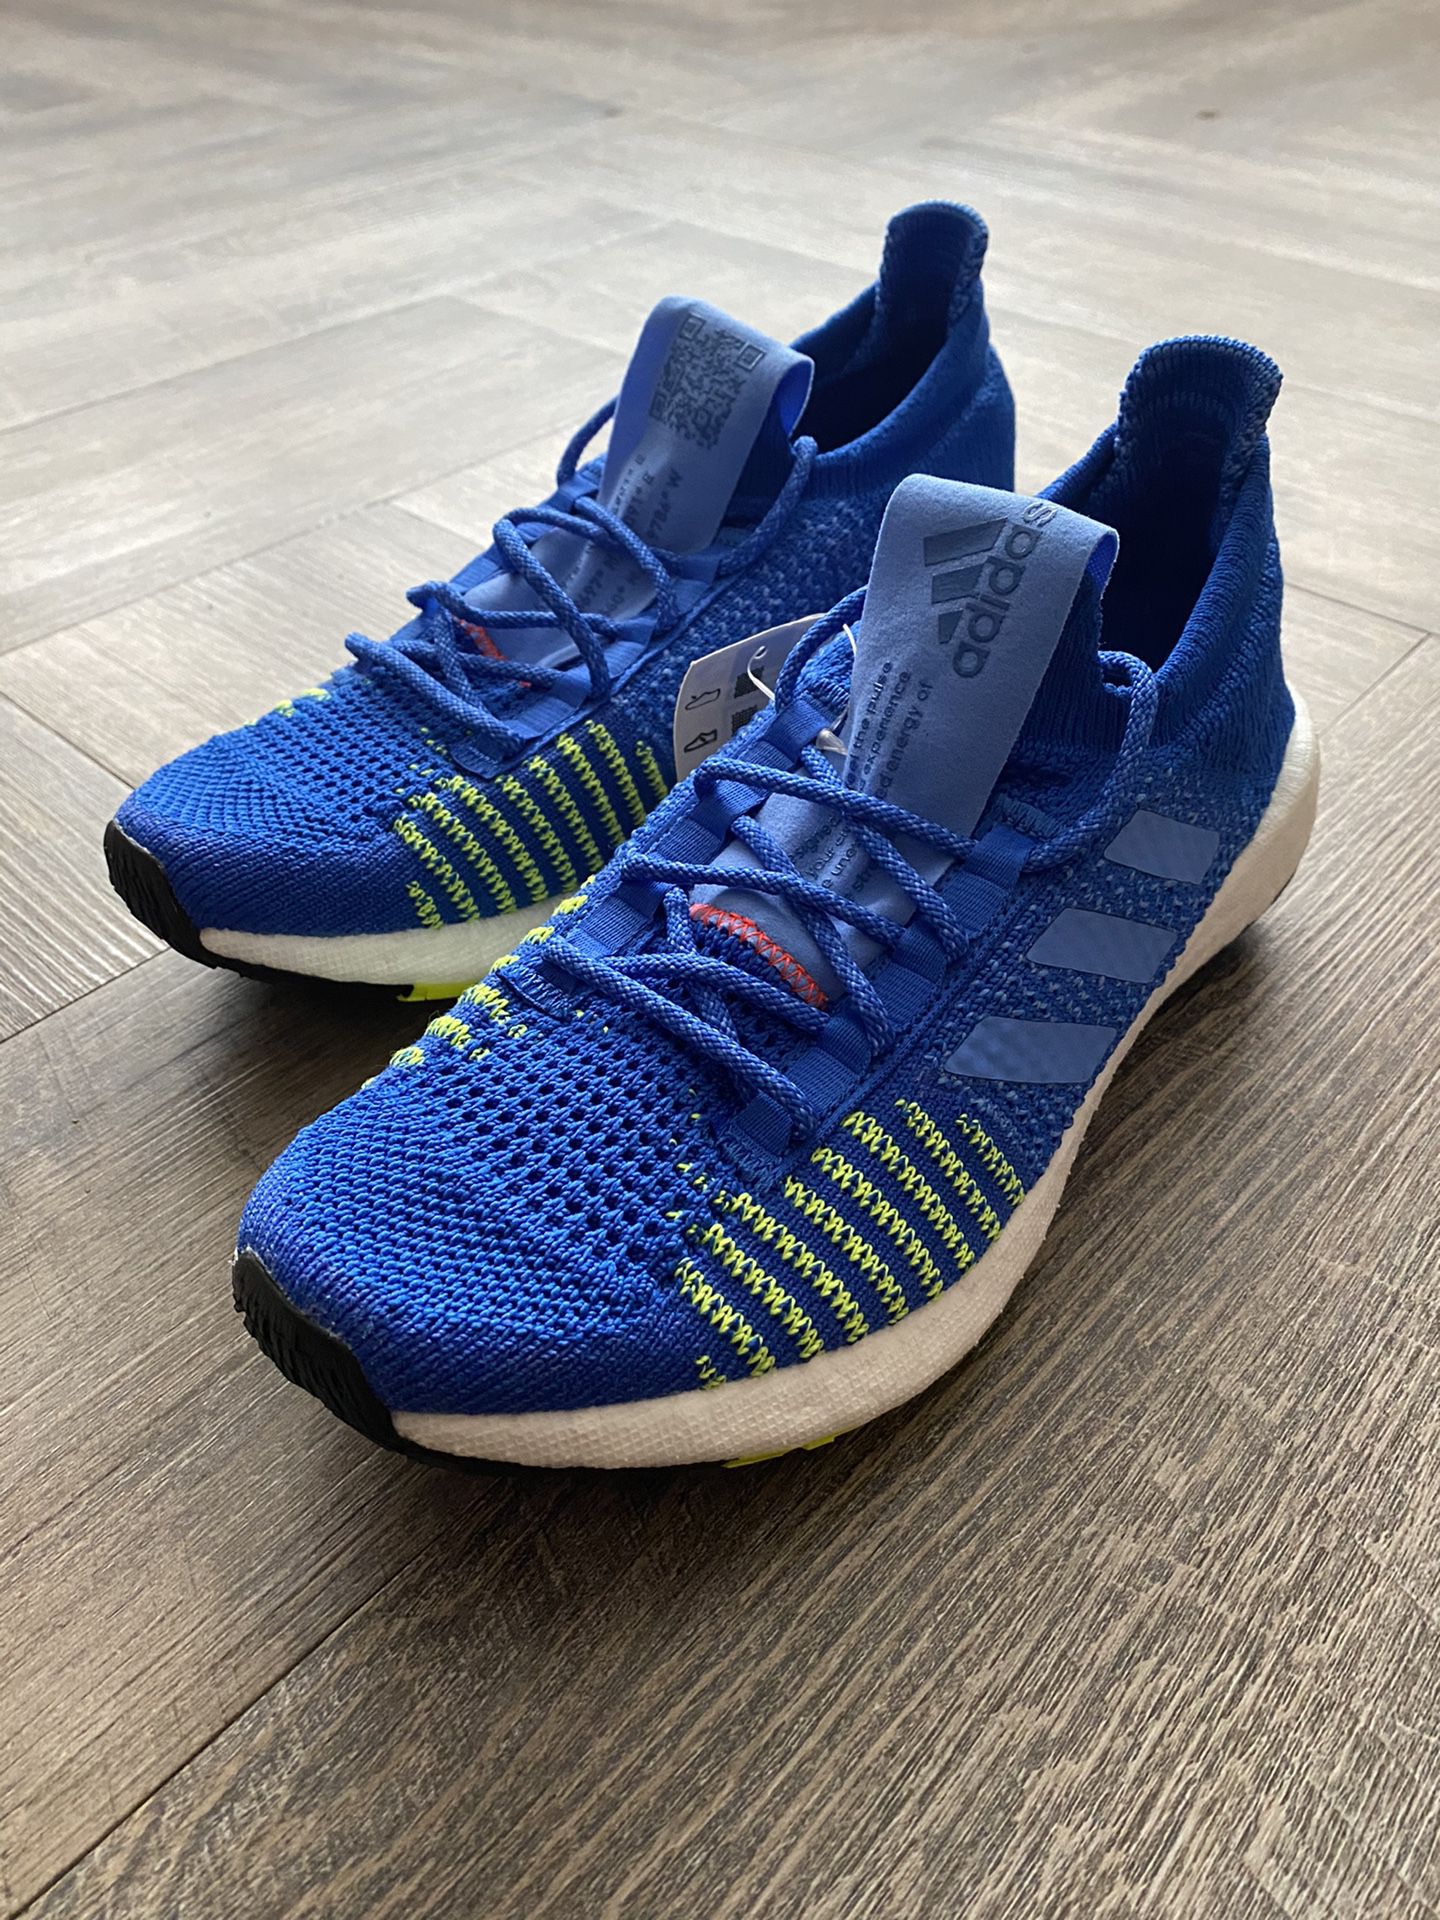 Adidas Pulse Boost HD Shoes Running Blue Solar Yellow Kids Size 6 EF0920